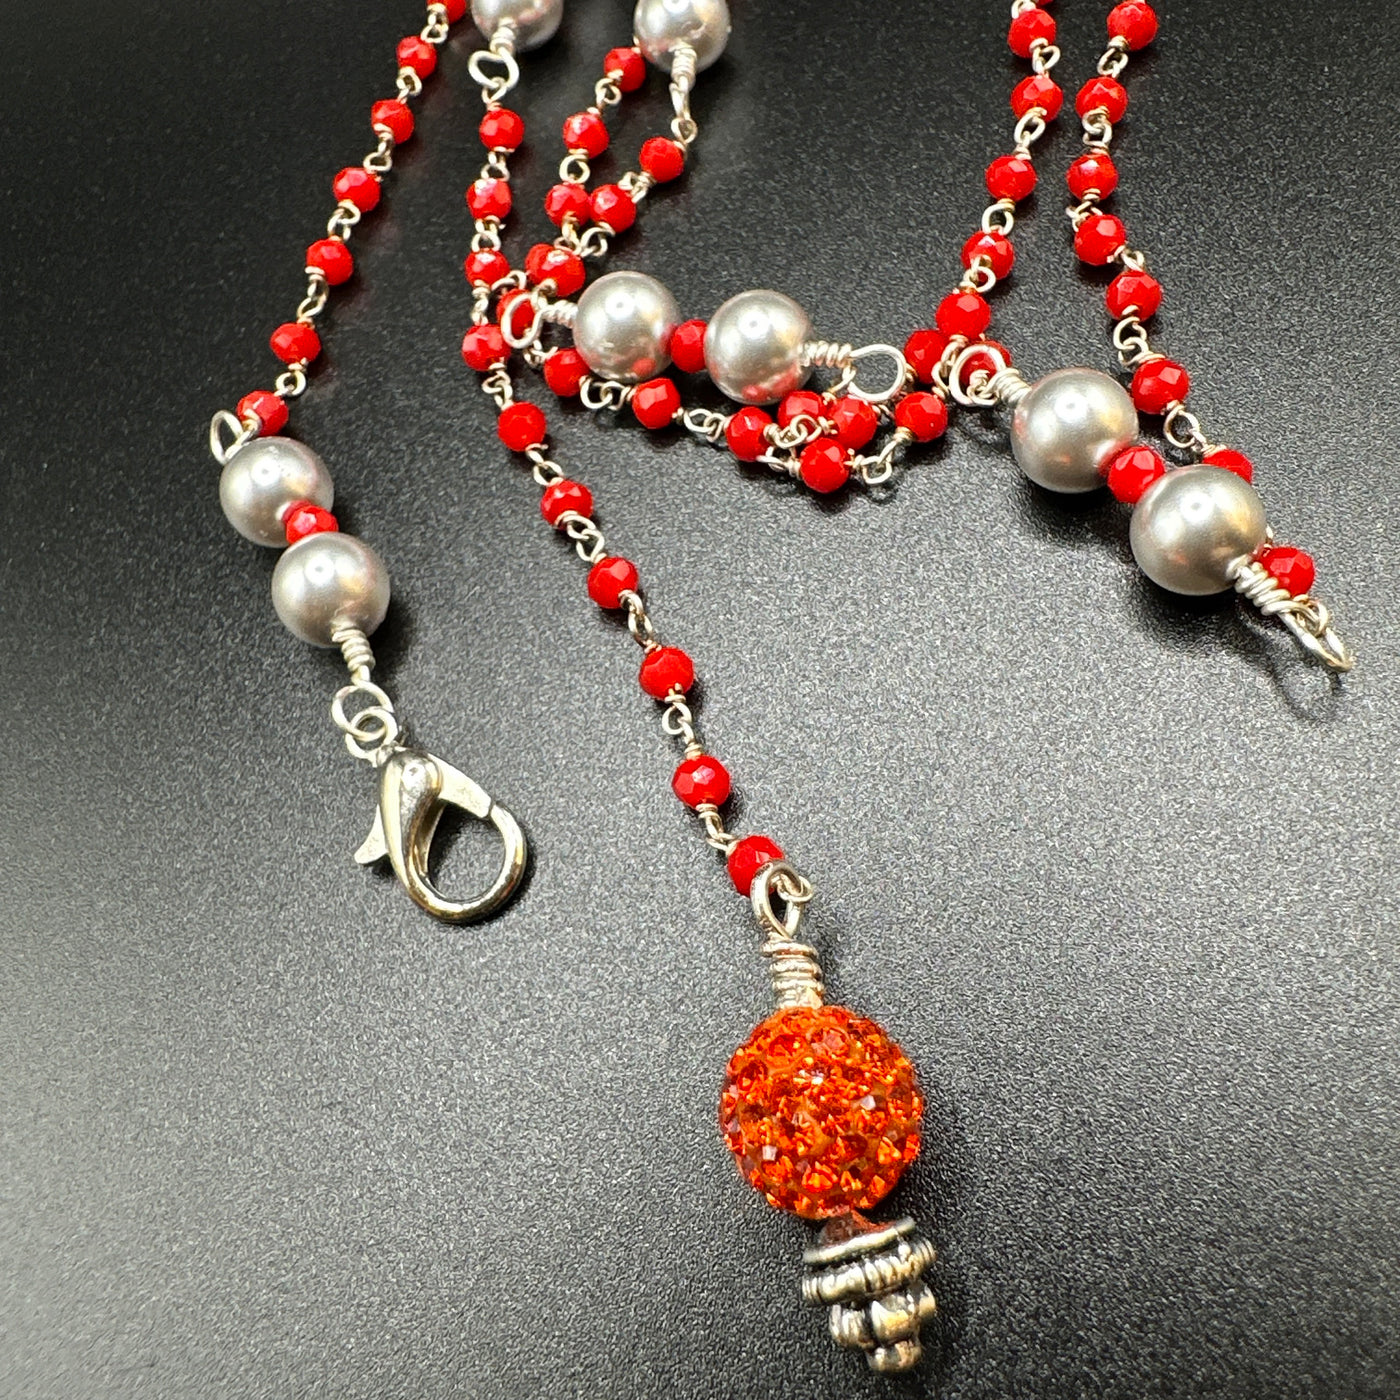 Scarf necklace silver 925 with red beads and light grey pearls